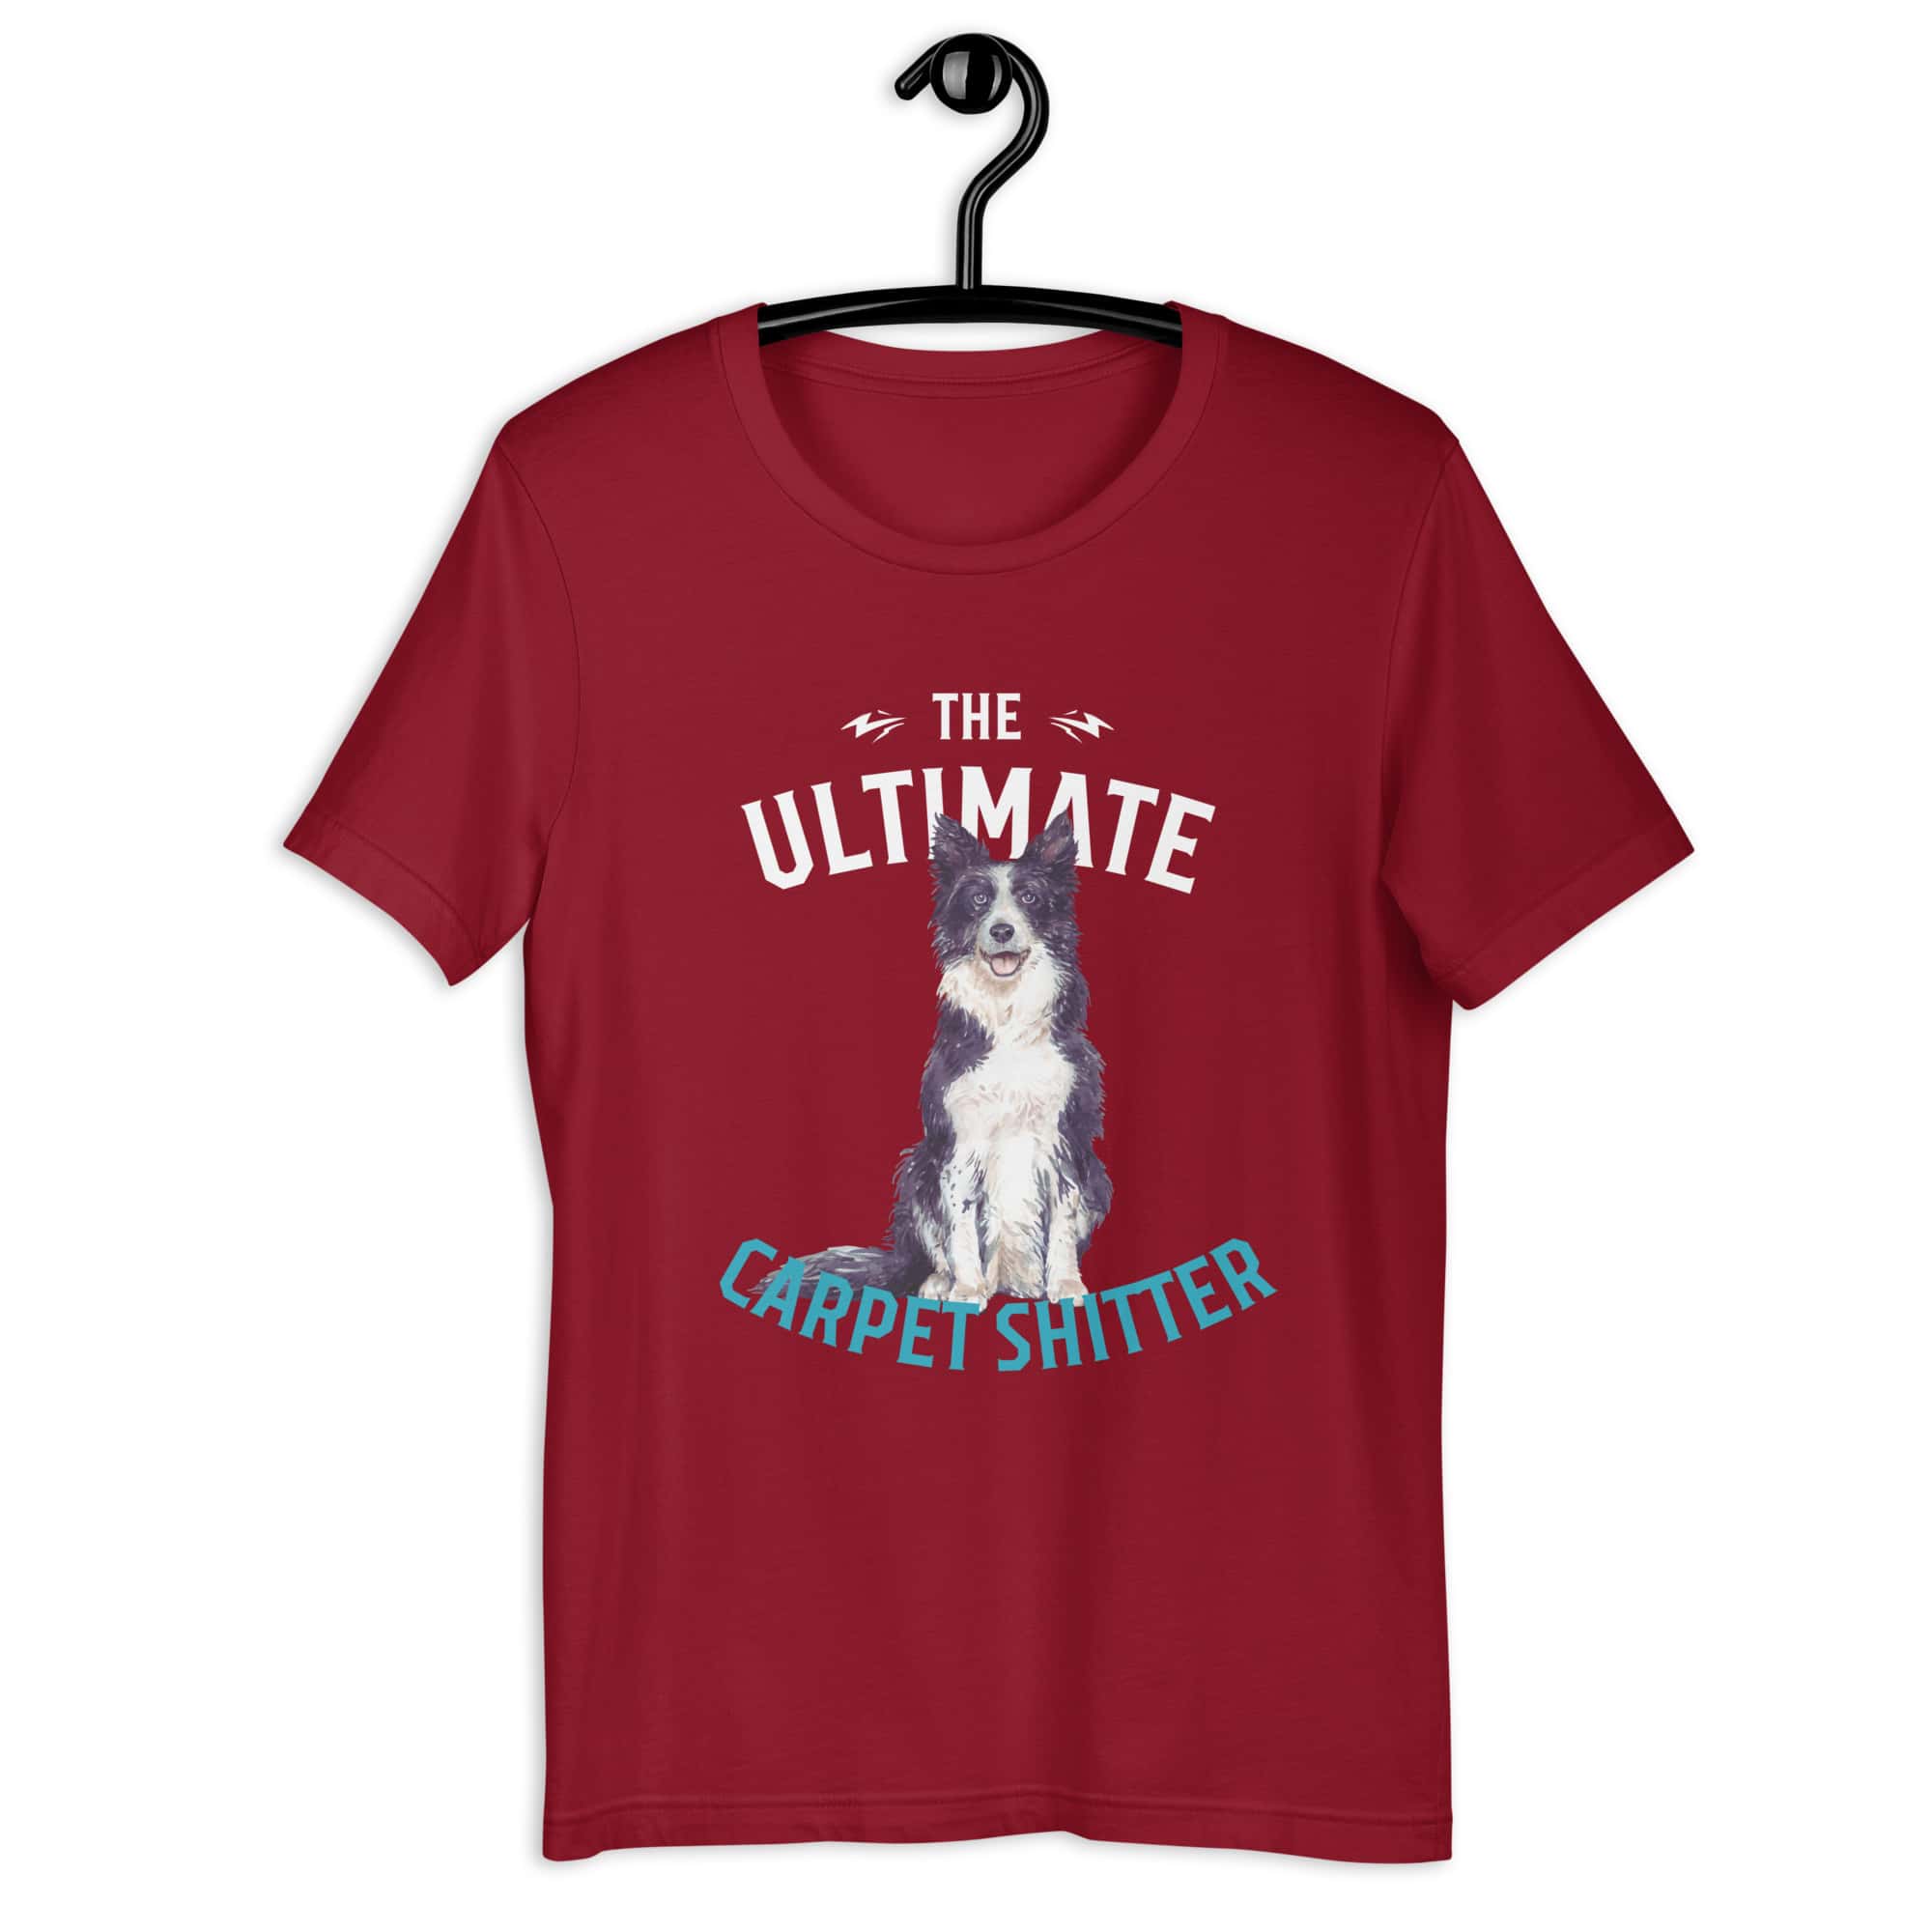 The Ultimate Carpet Shitter Funny Border Collie Unisex T-Shirt maroon